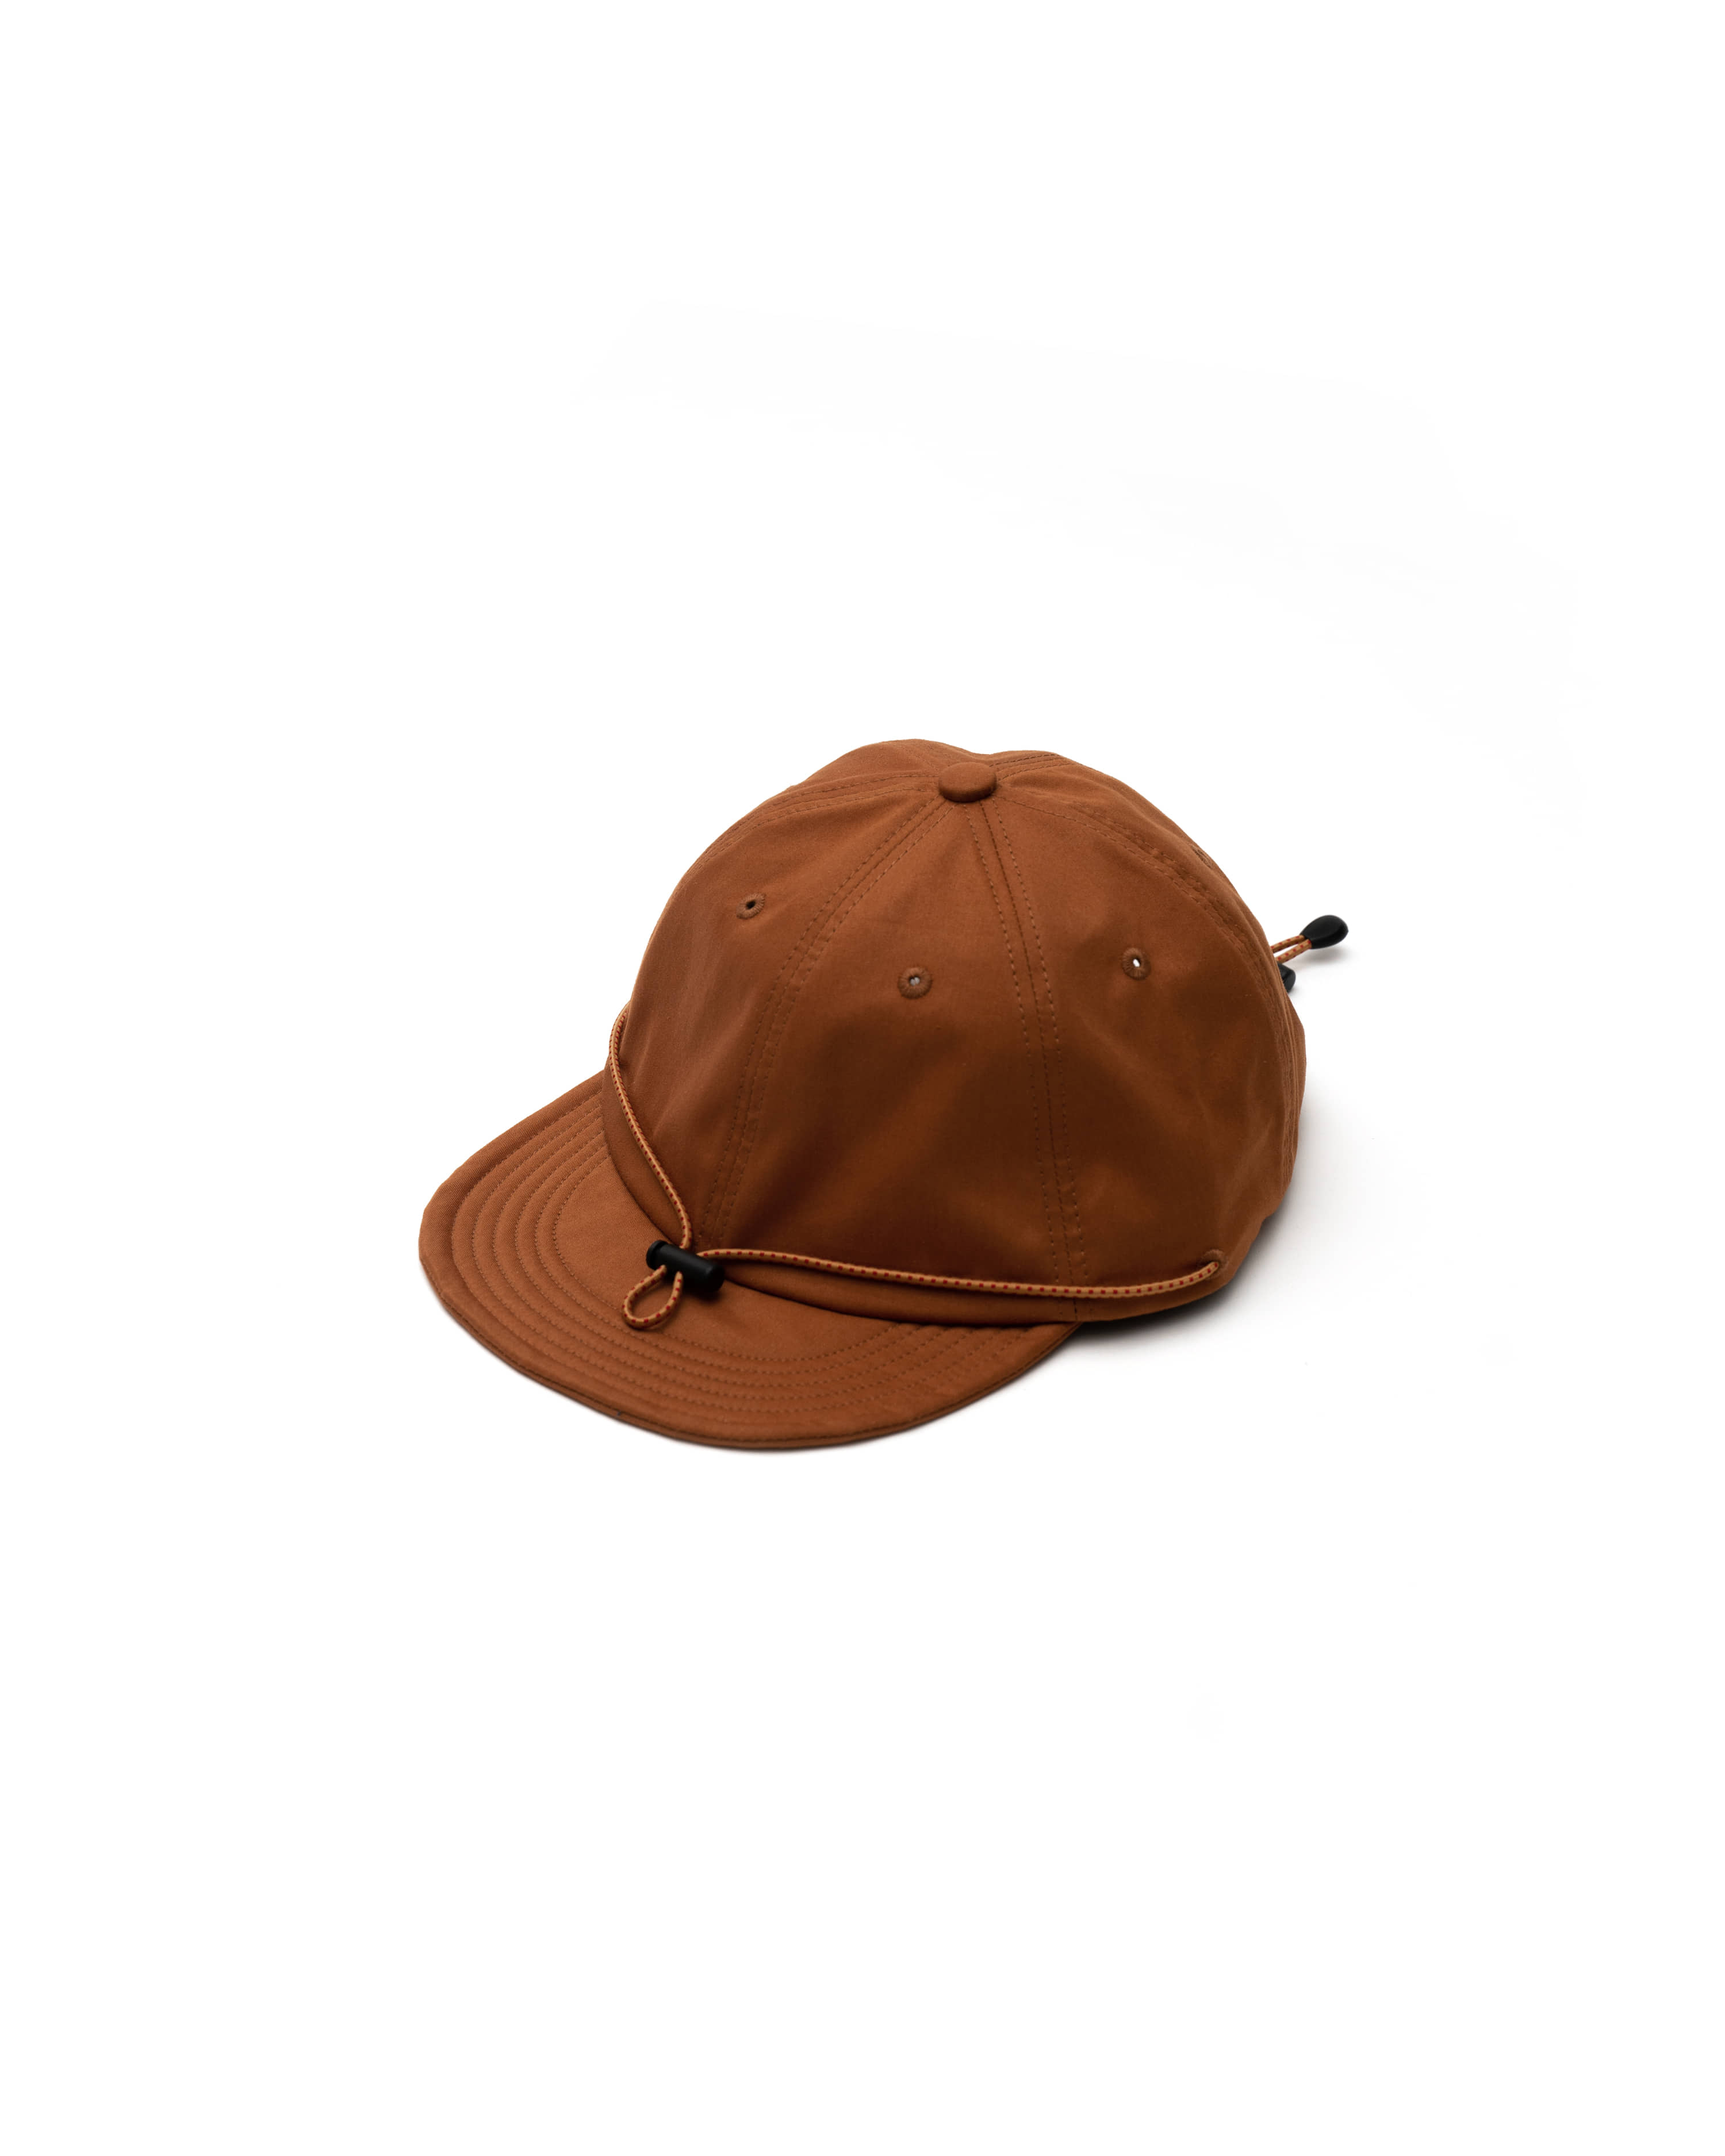 [out of stock] Town 1 - Camel